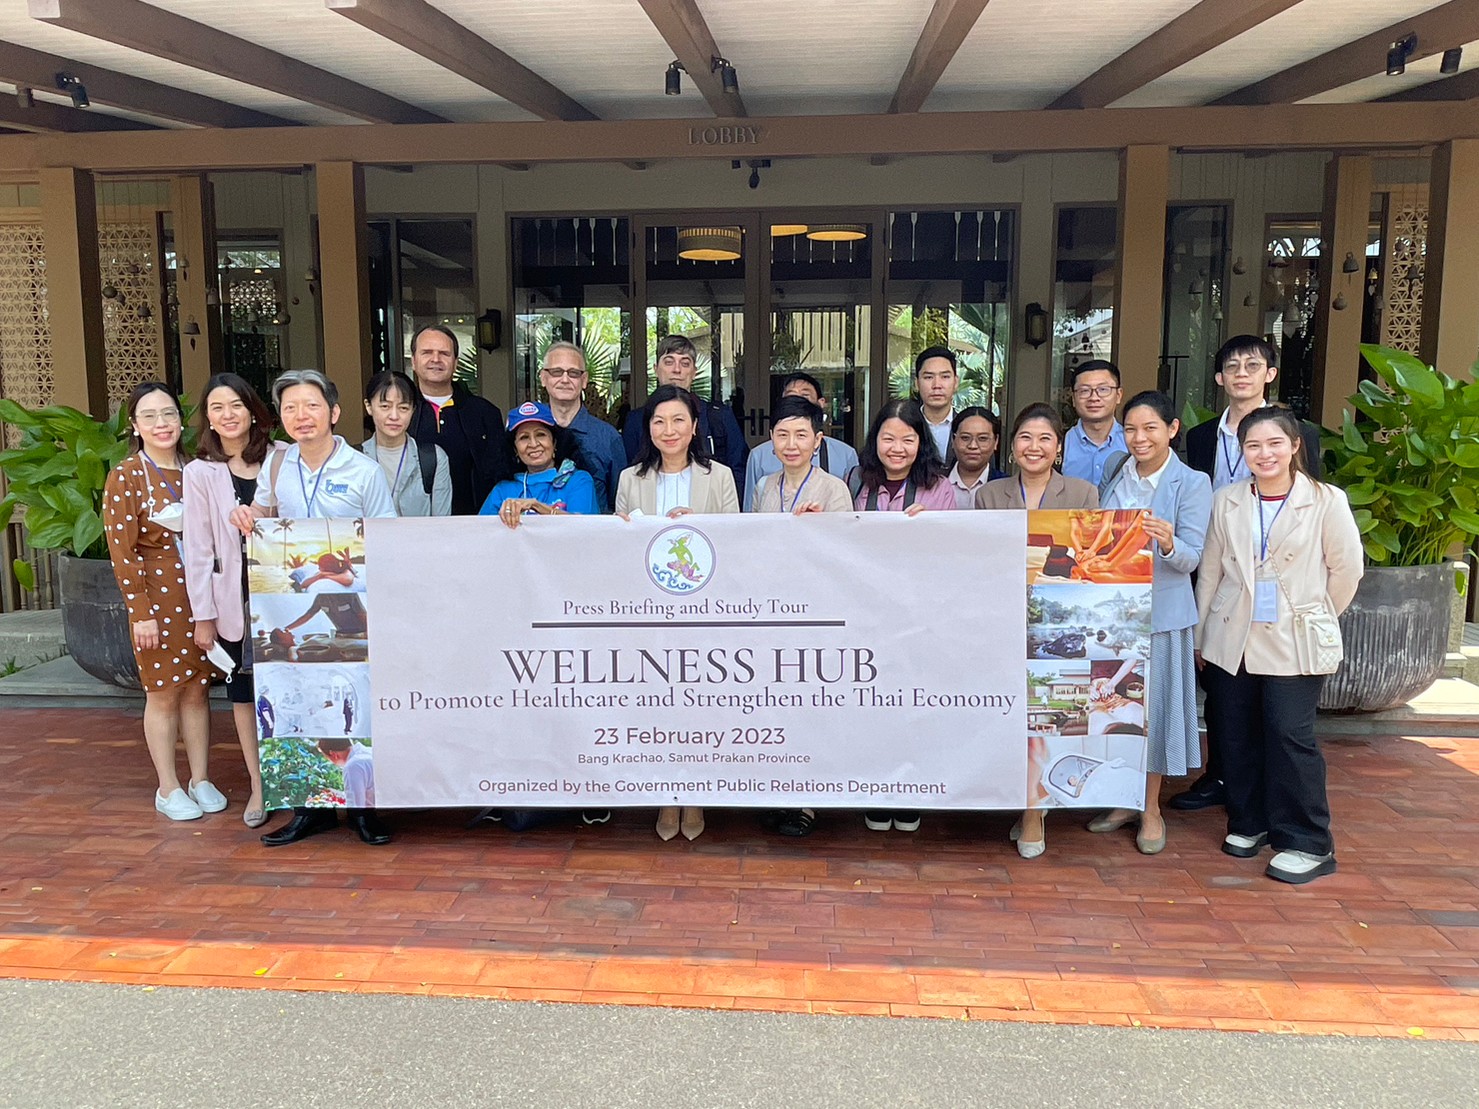 Press Briefing and Study Tour “Wellness Hub to Promote Healthcare and Strengthen the Thai Economy”